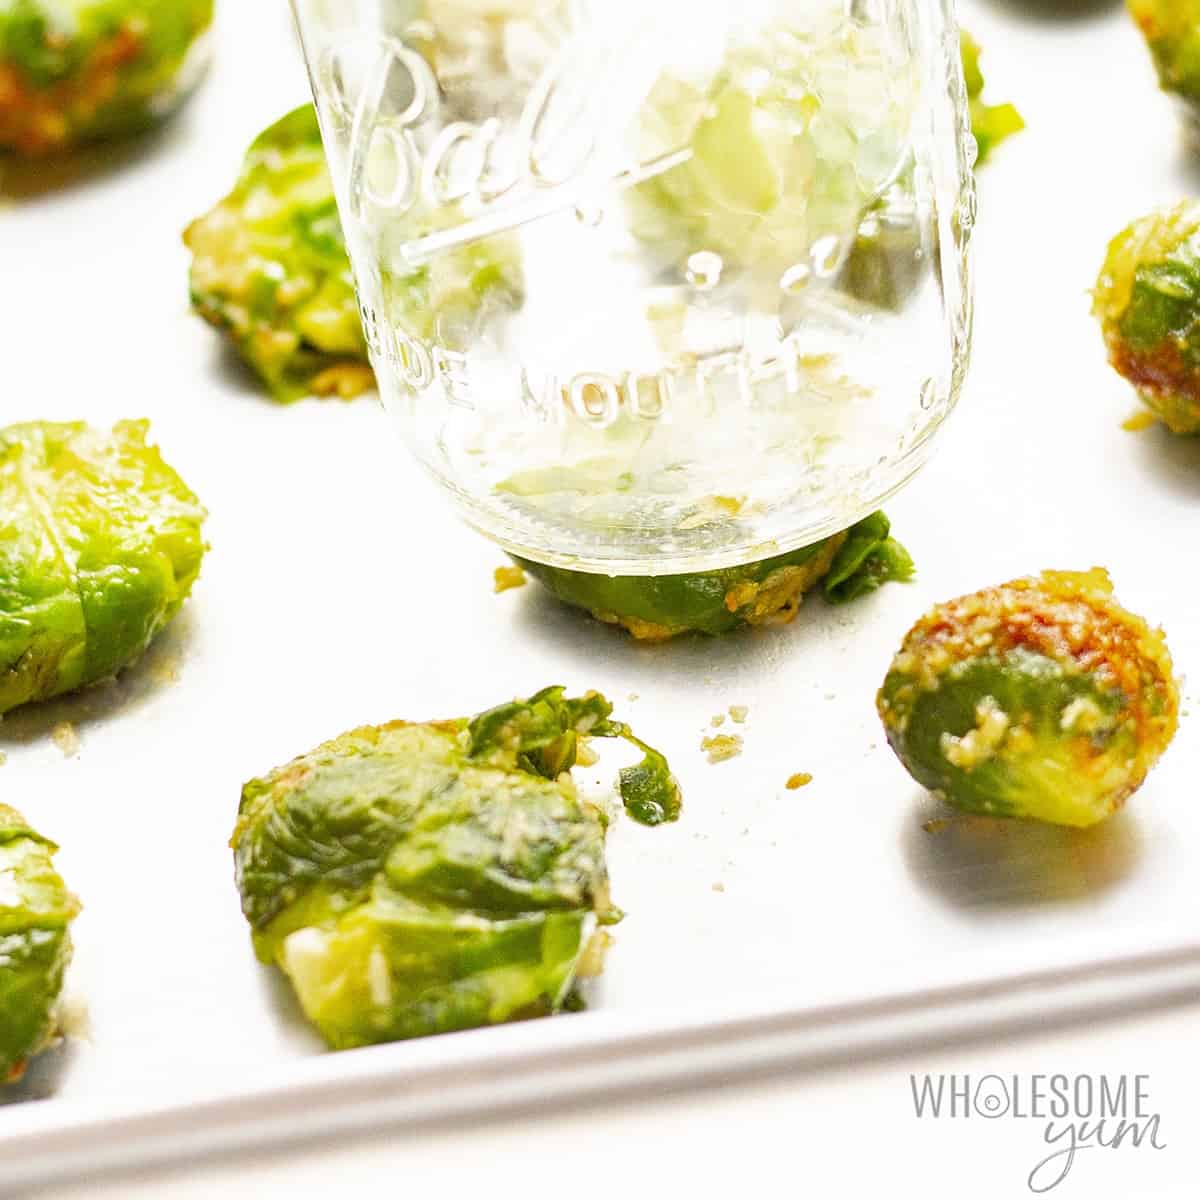 Brussels sprouts smashed under a glass mason jar.